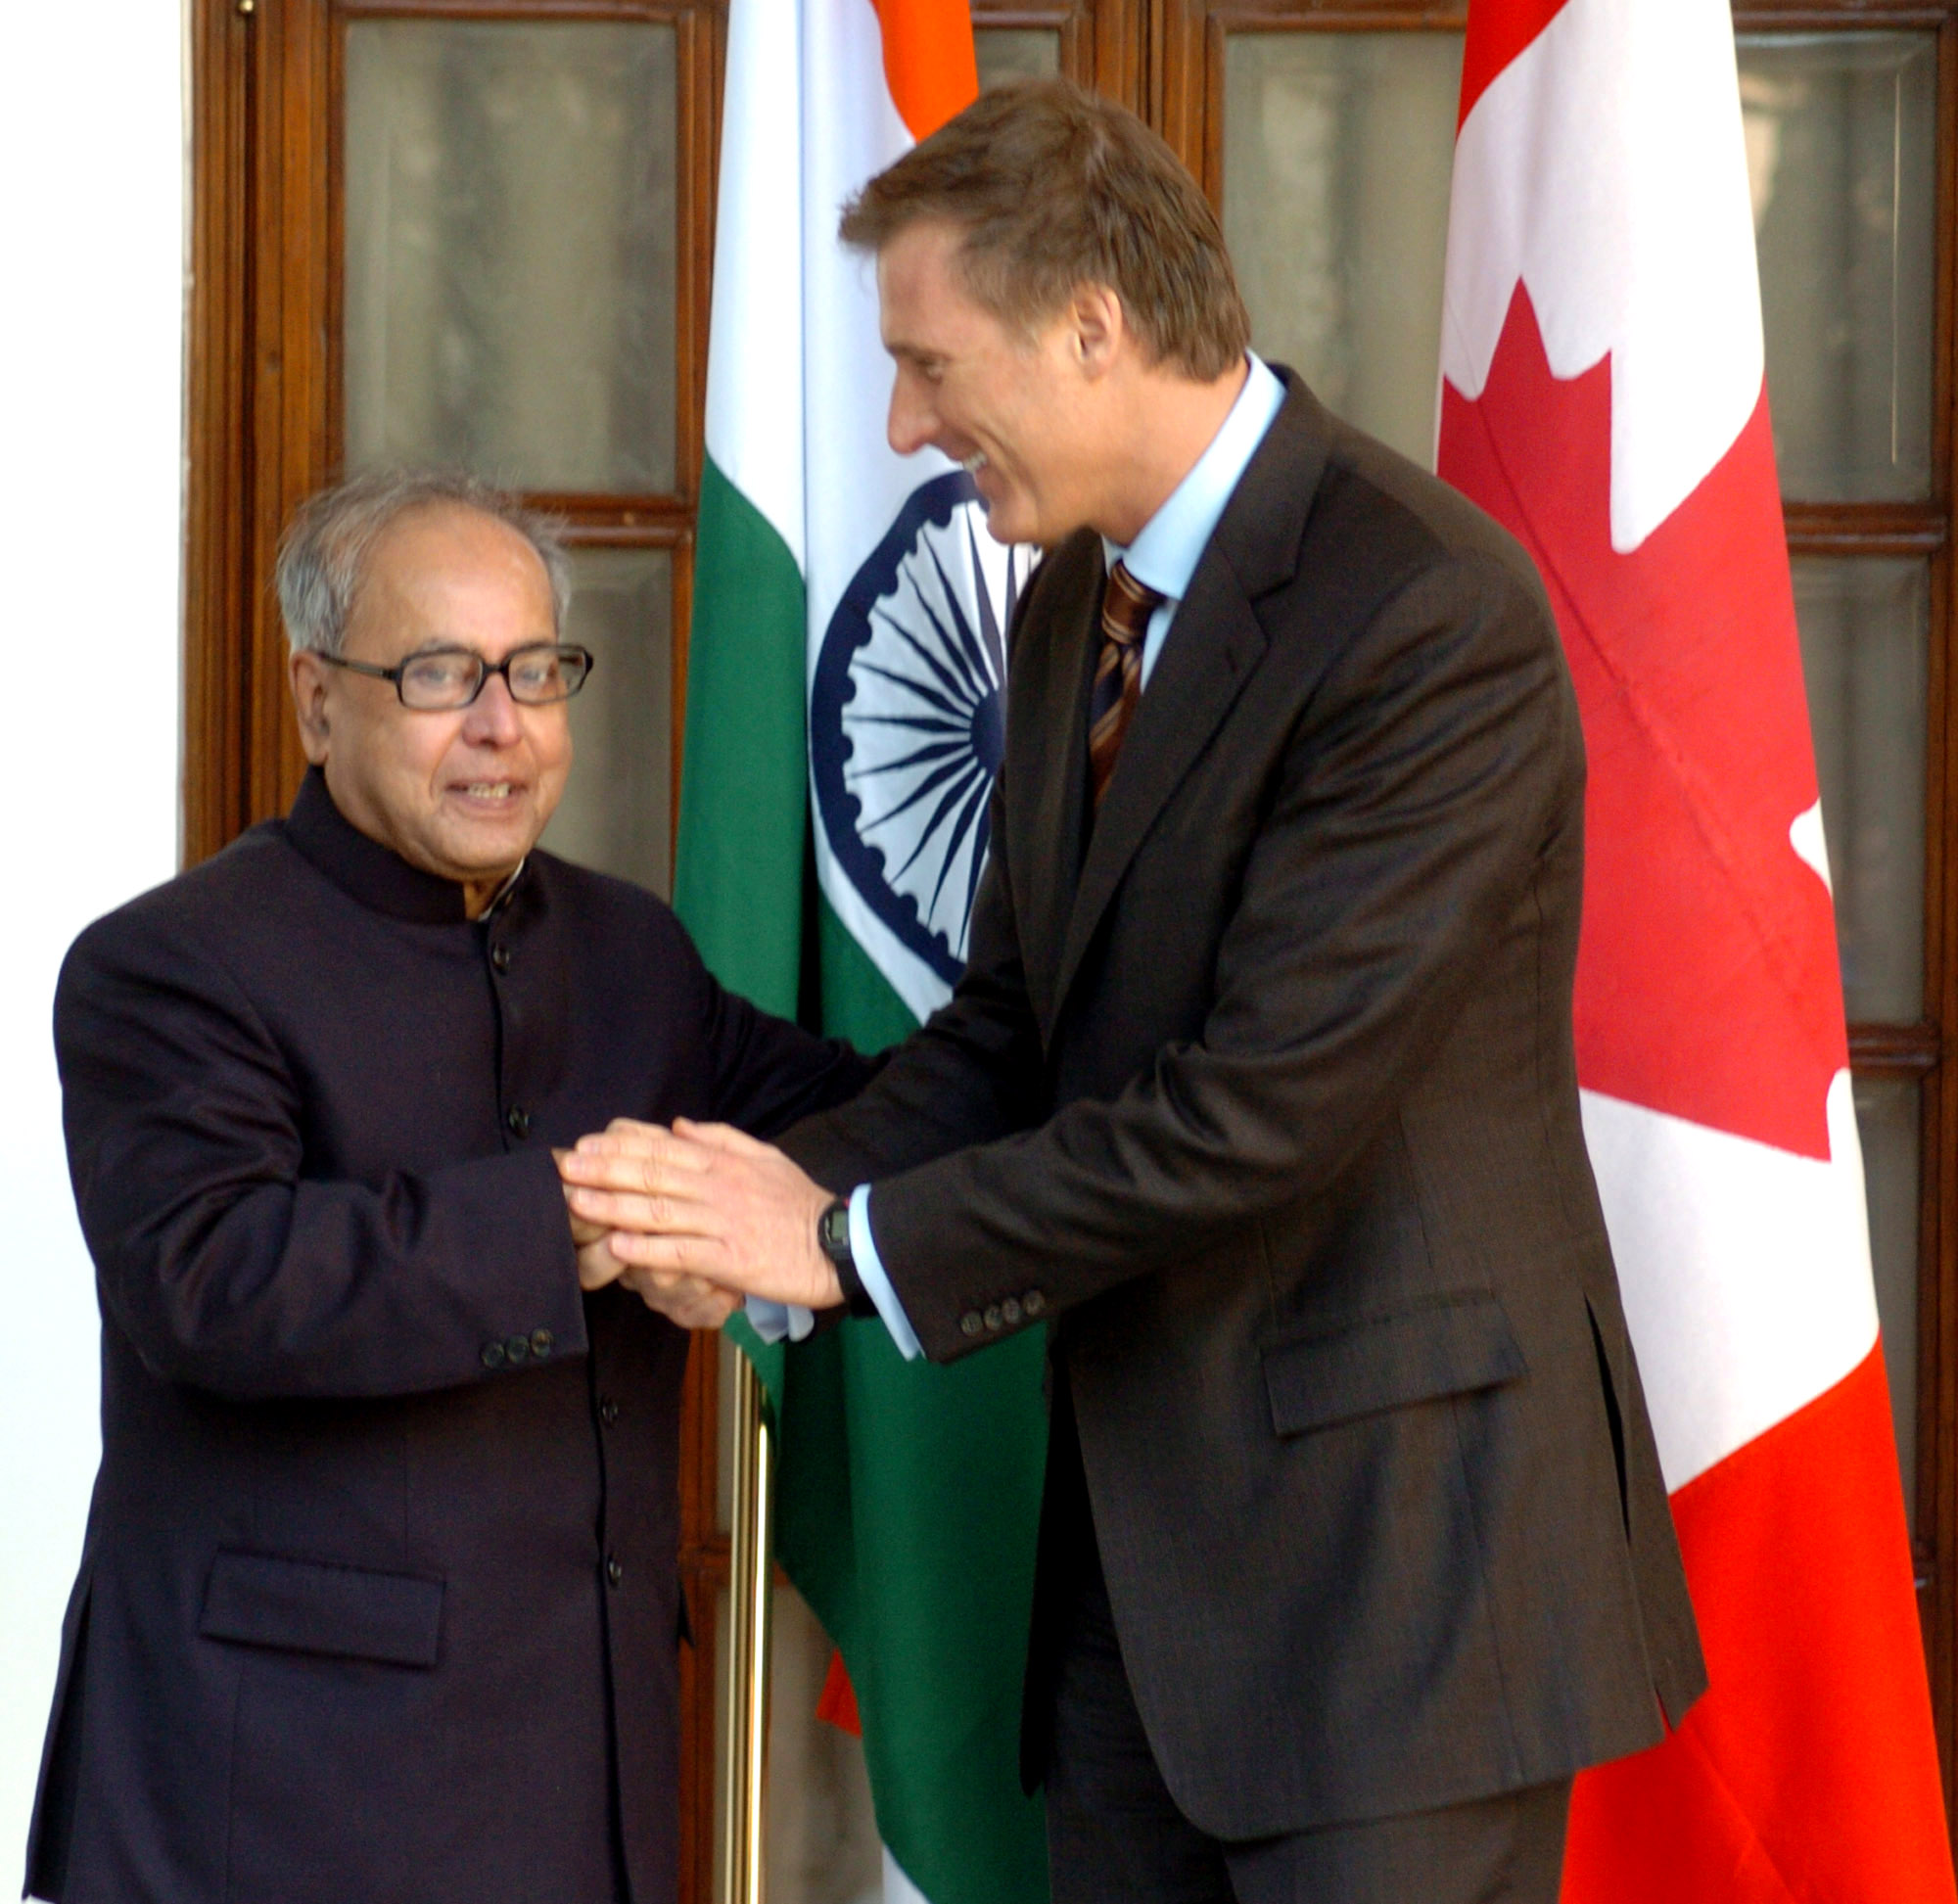 File:The Canadian Foreign Minister, Mr.Maxime Bernier meeting with the  Union Minister of External Affairs, Shri Pranab Mukherjee, in New Delhi on  January 12, 2008 (1).jpg - Wikimedia Commons